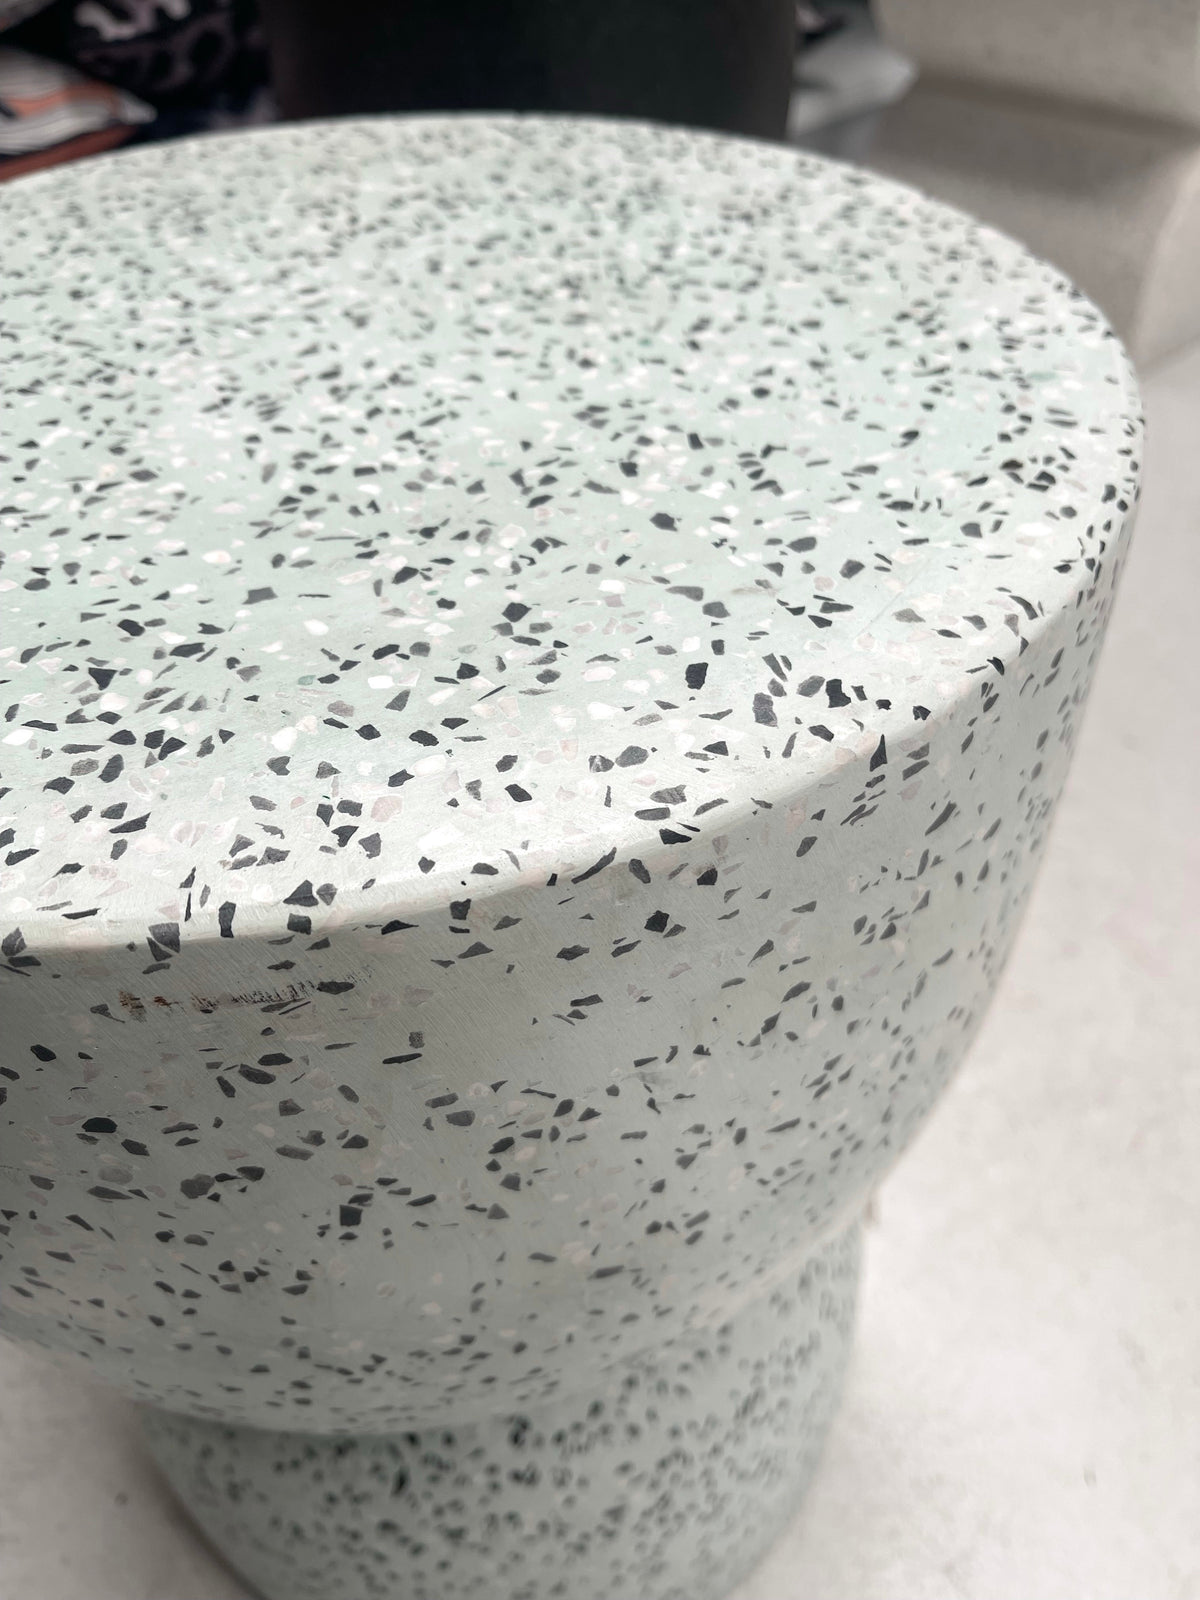 EX DISPLAY MINOR DEFECTS!! Hourglass Concrete Stool / Side Table - Mint Terrazzo